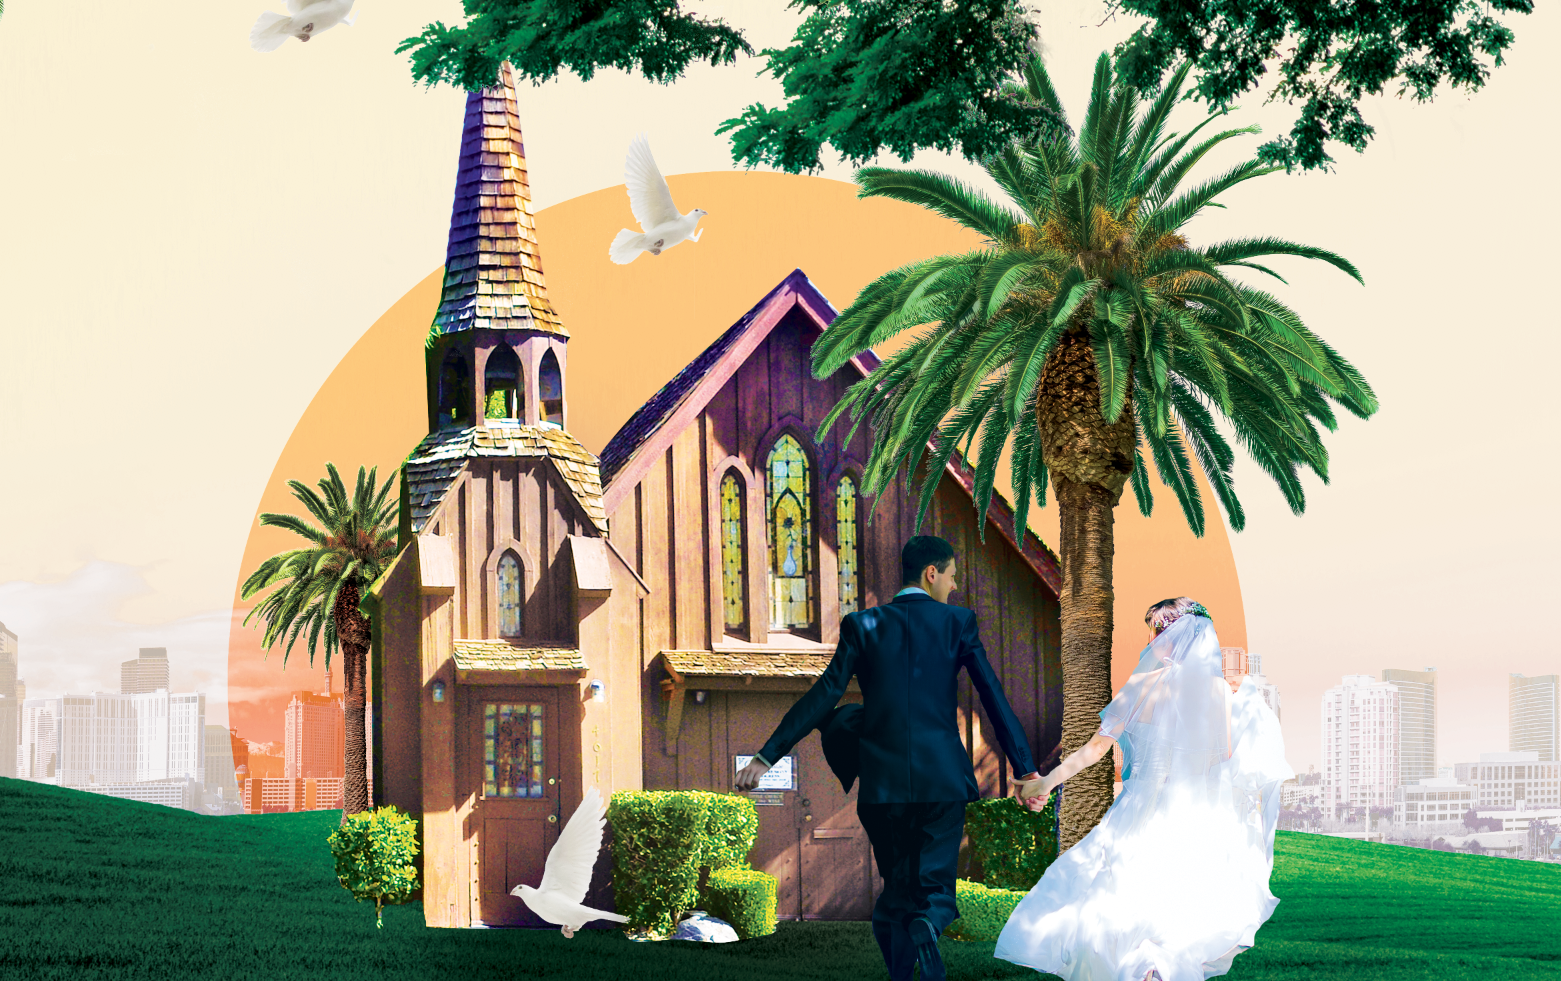 Getting married in Las Vegas? Heres what you need to know